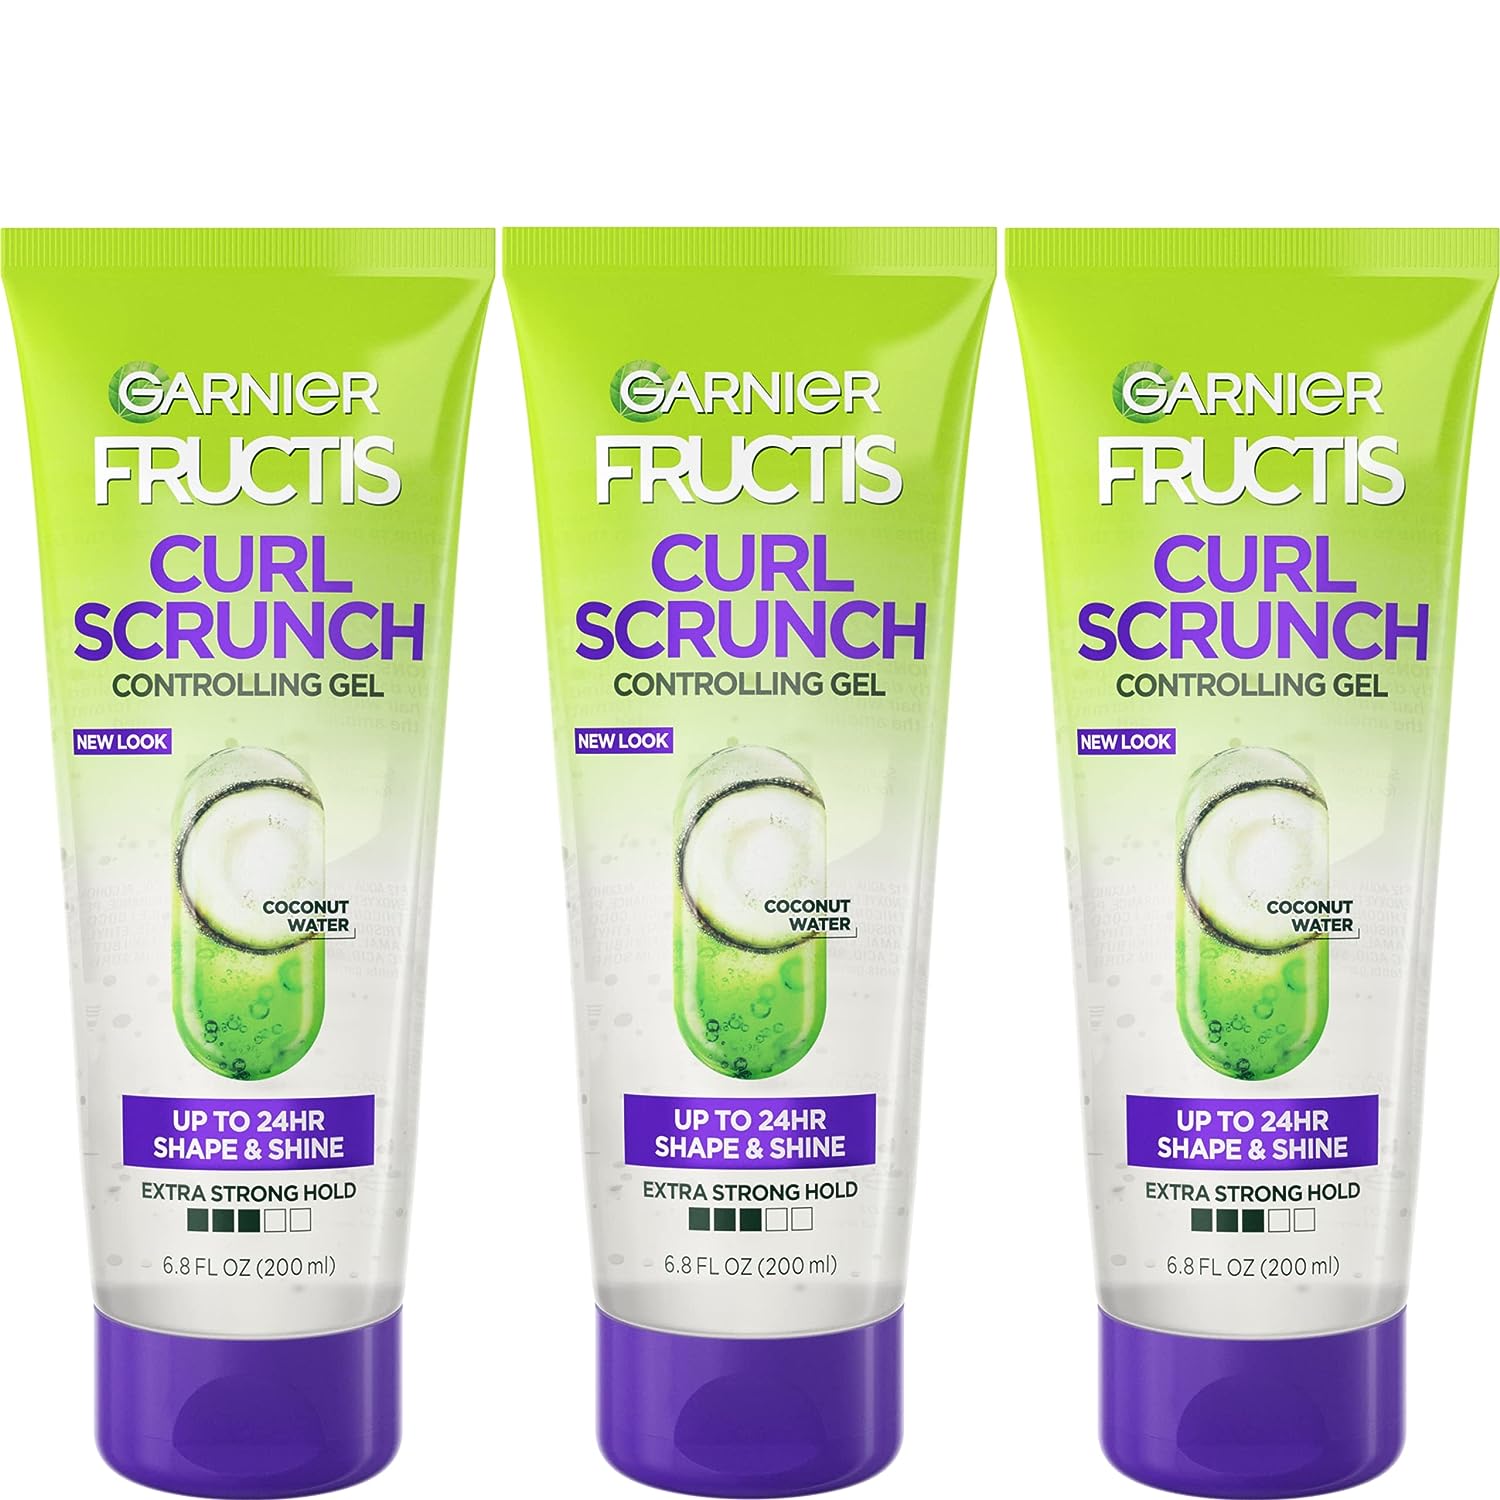 Garnier Fructis Style Curl Scrunch Controlling Gel for Shape & Shine, 6.8 Fl Oz, 3 Count (Packaging May Vary)